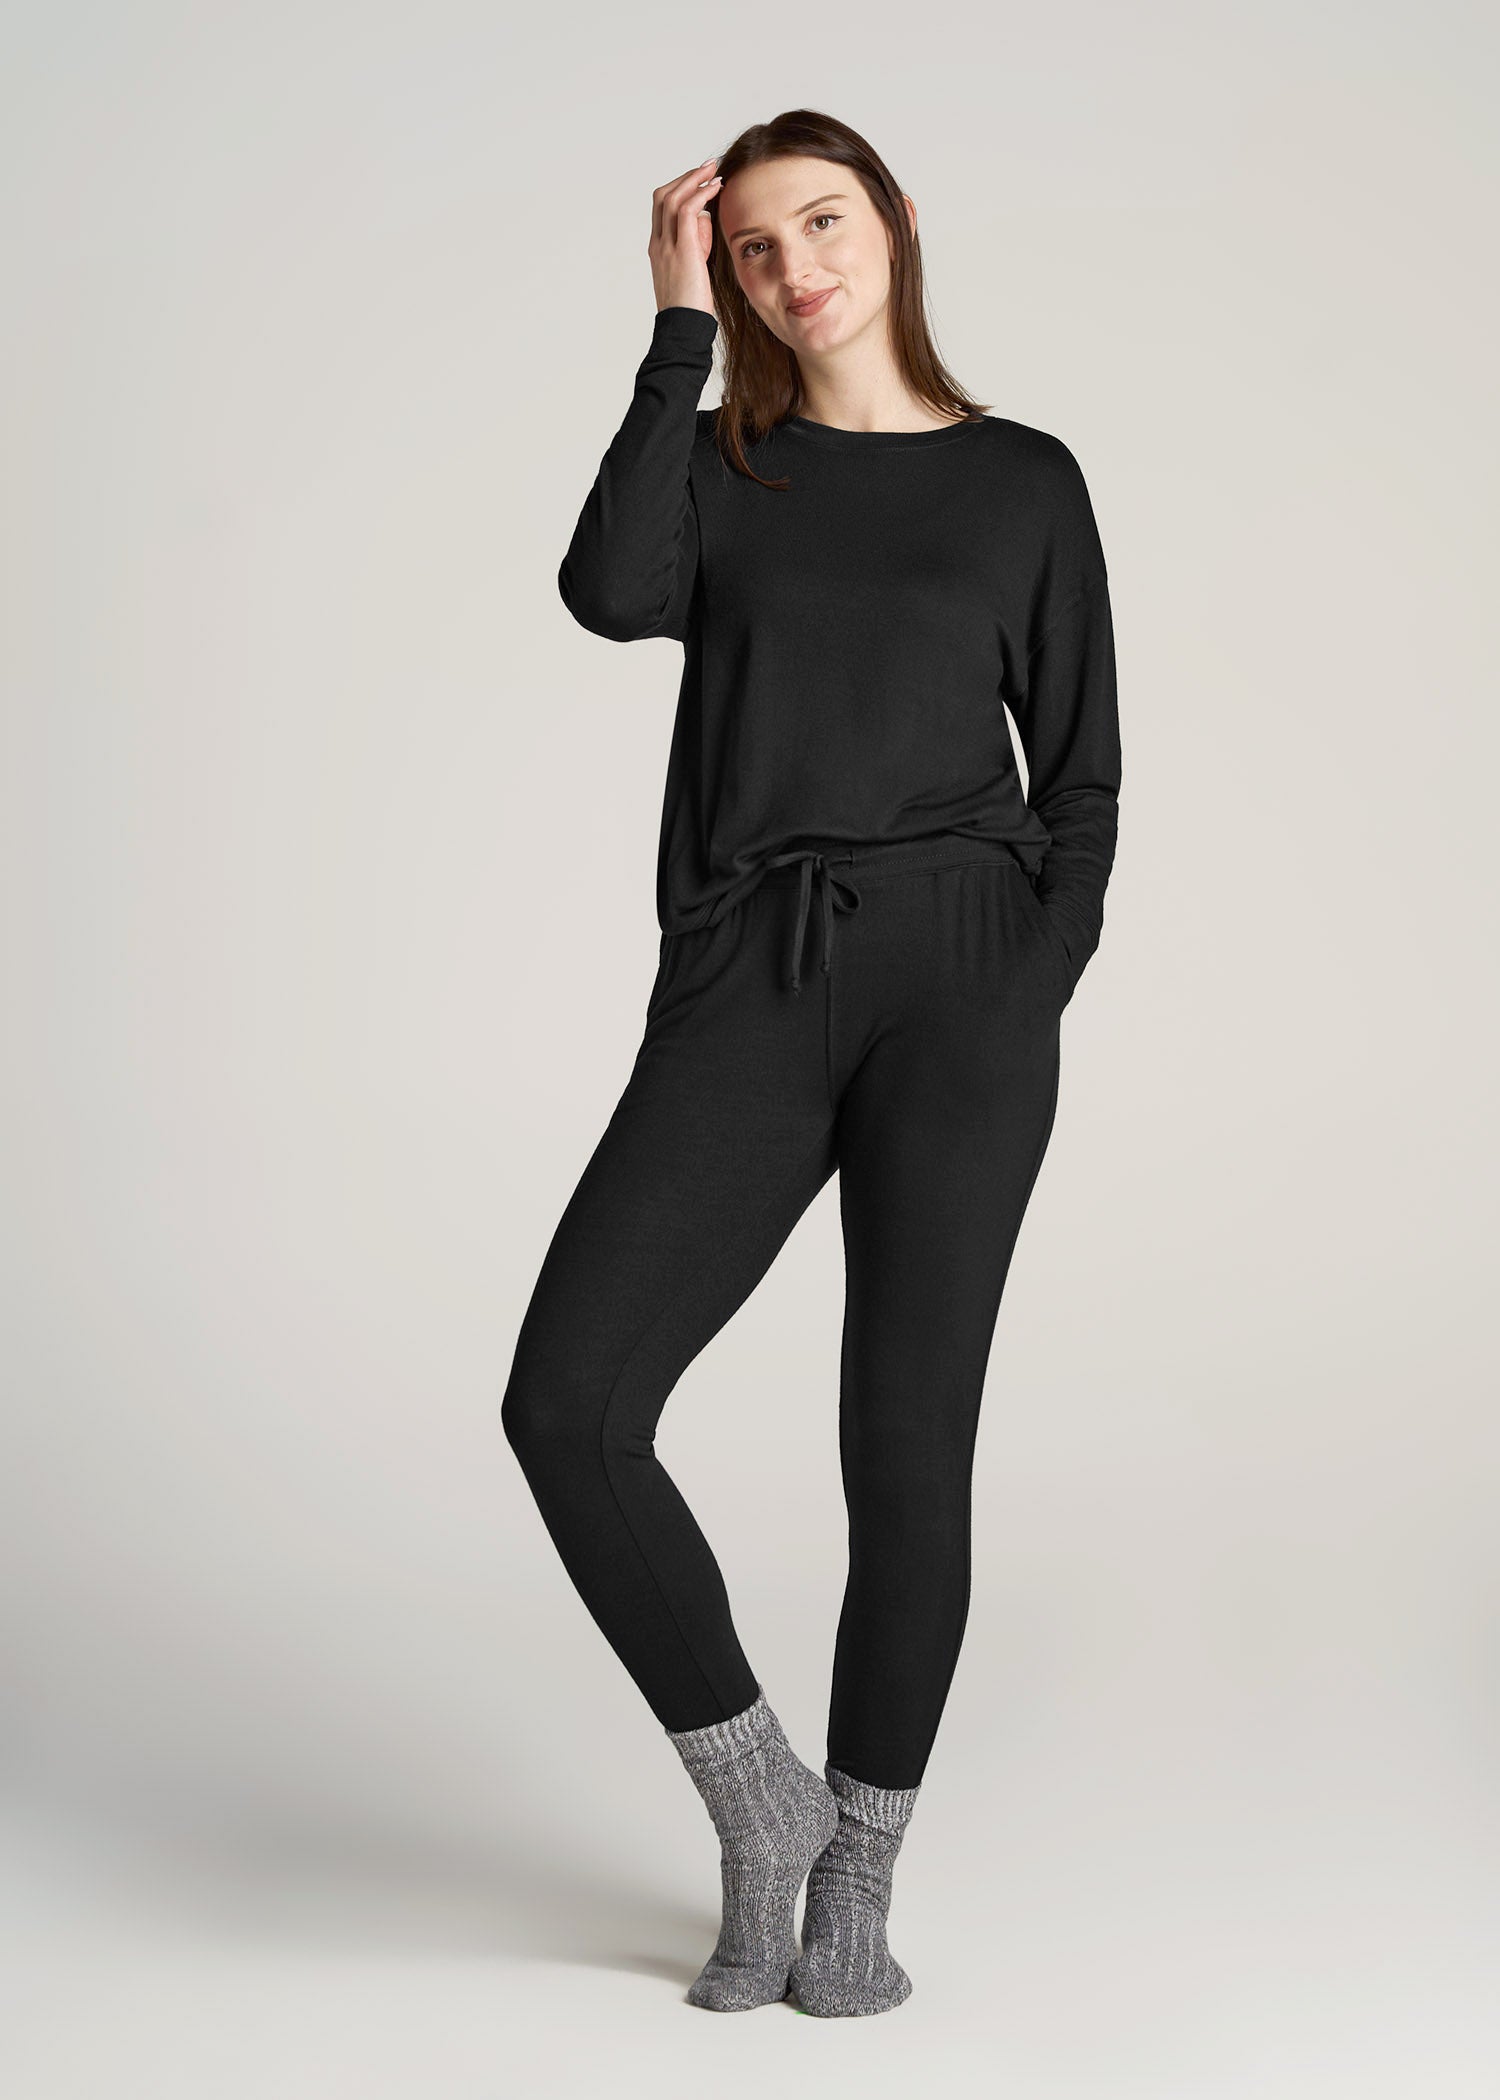 Black Tall Lounge Jogger For Women